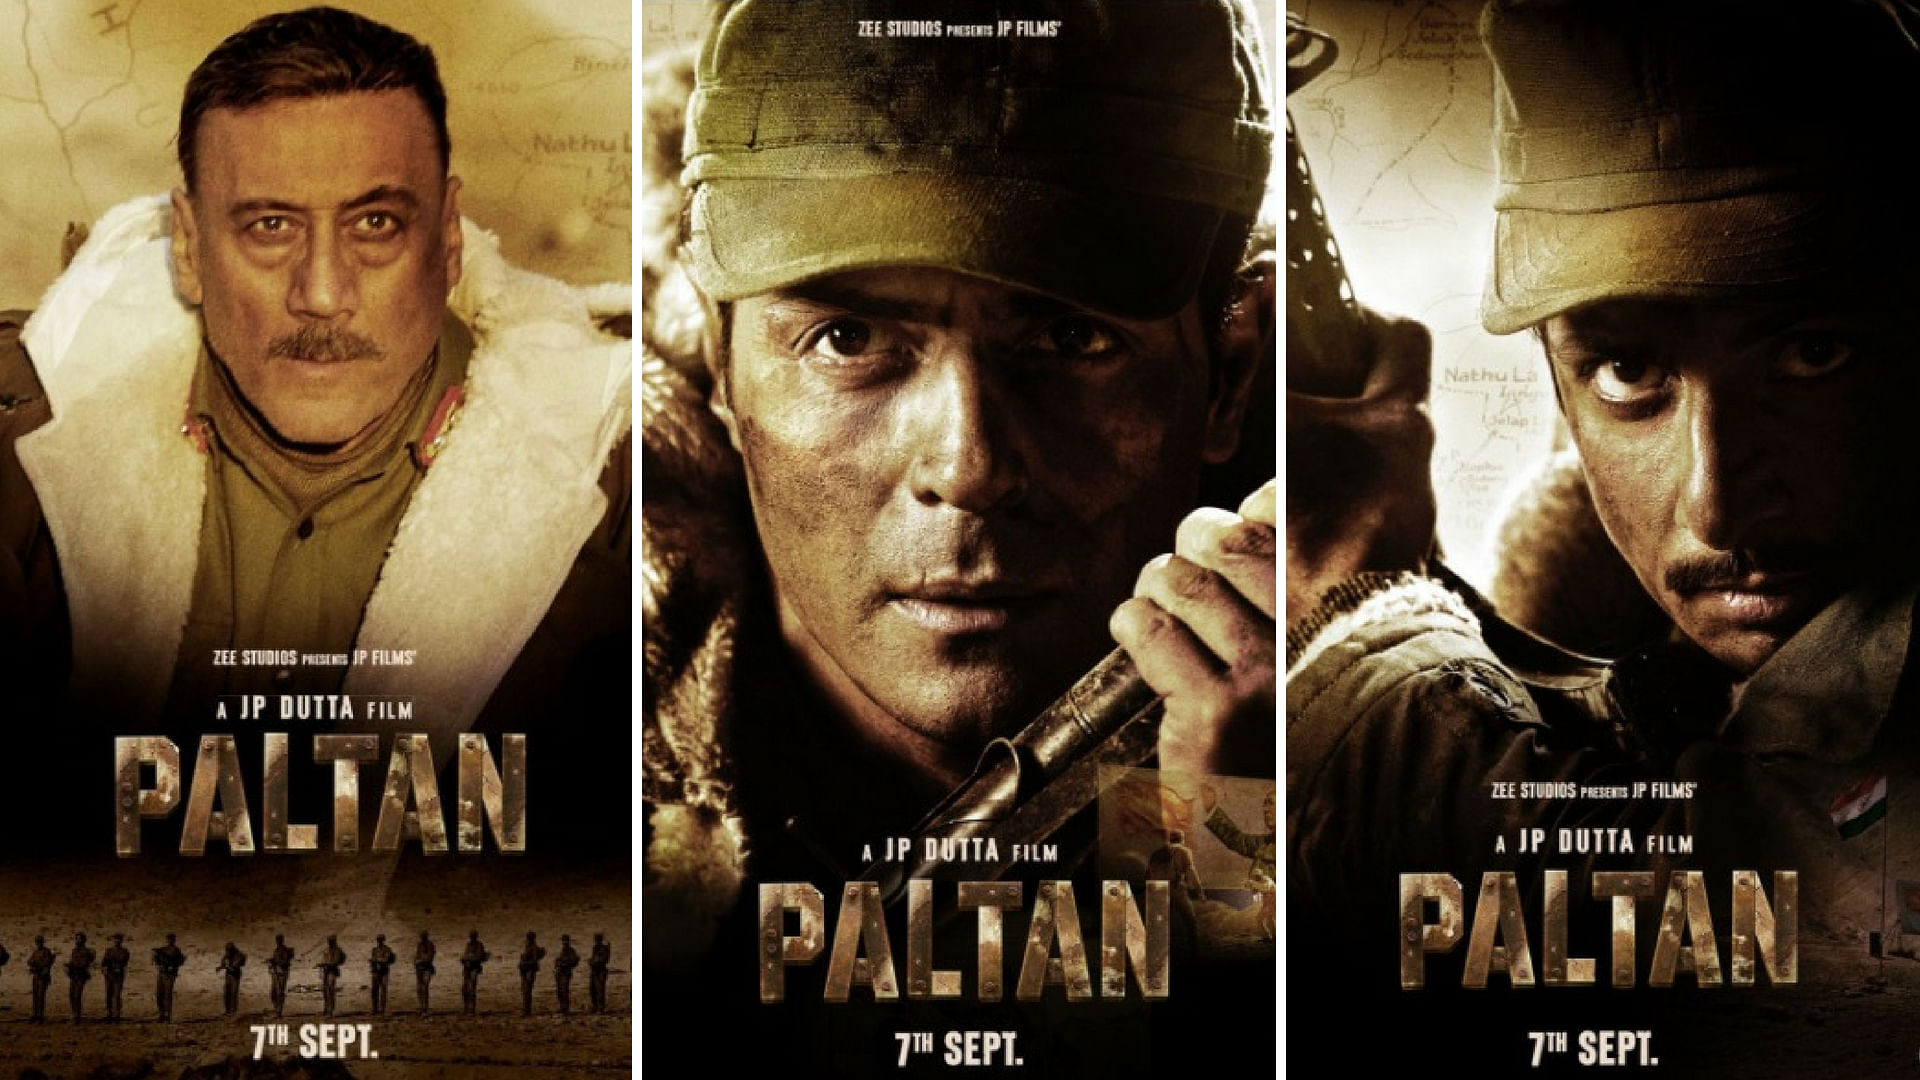 First look posters of JP Dutta’s <i>Paltan.</i>